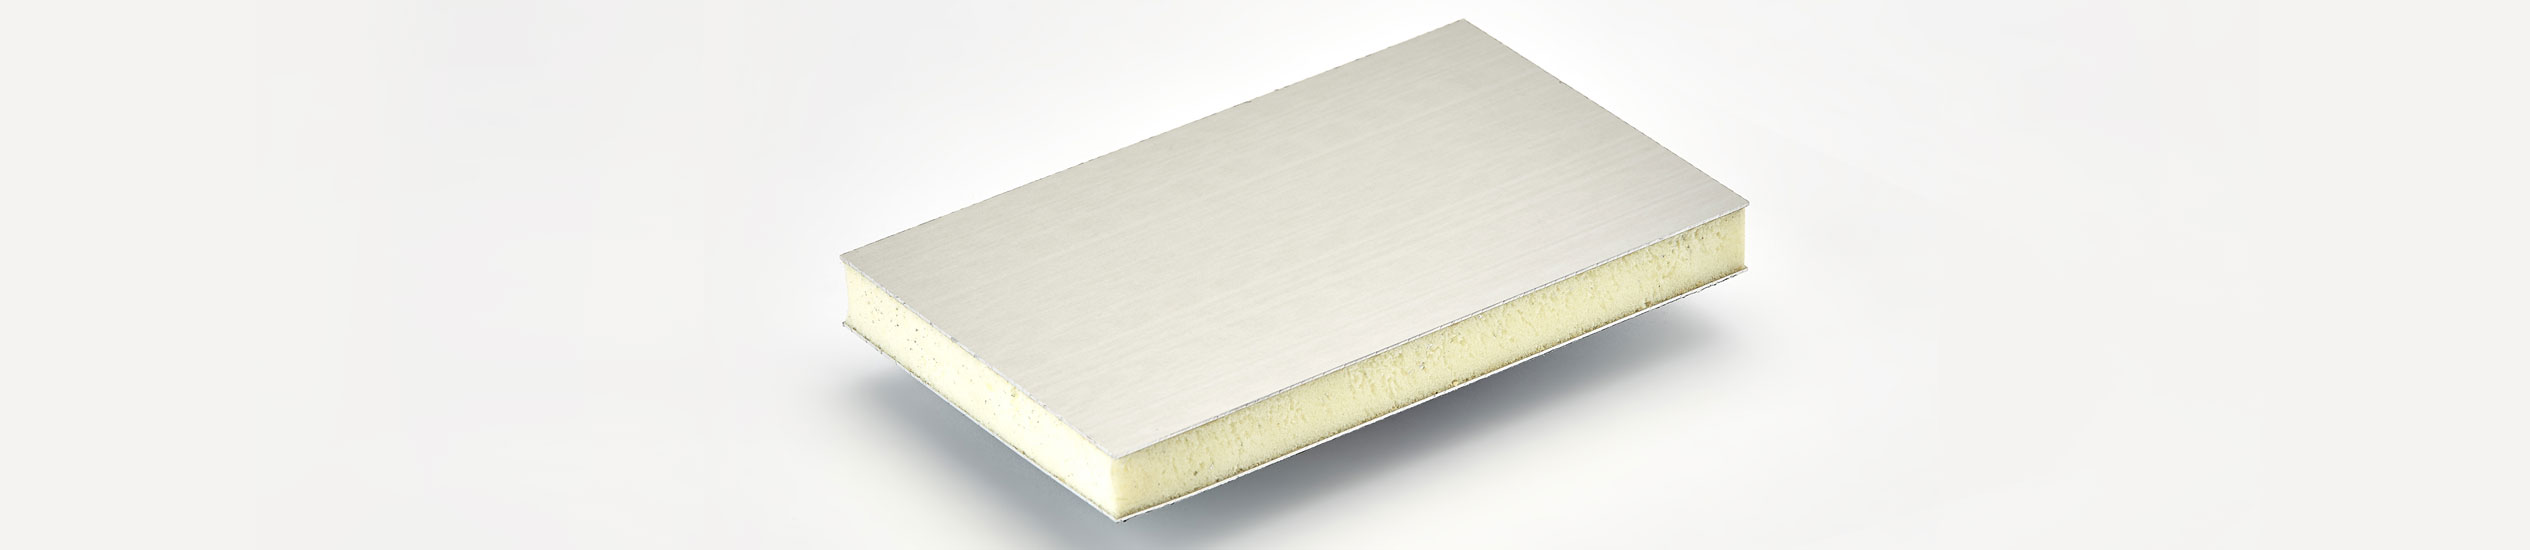 COMPOCEL ALF is a lightweight panel composed by a core in EPS "extruded polystyrene" and bonded with aluminium faces.Foam core is offered in different densities